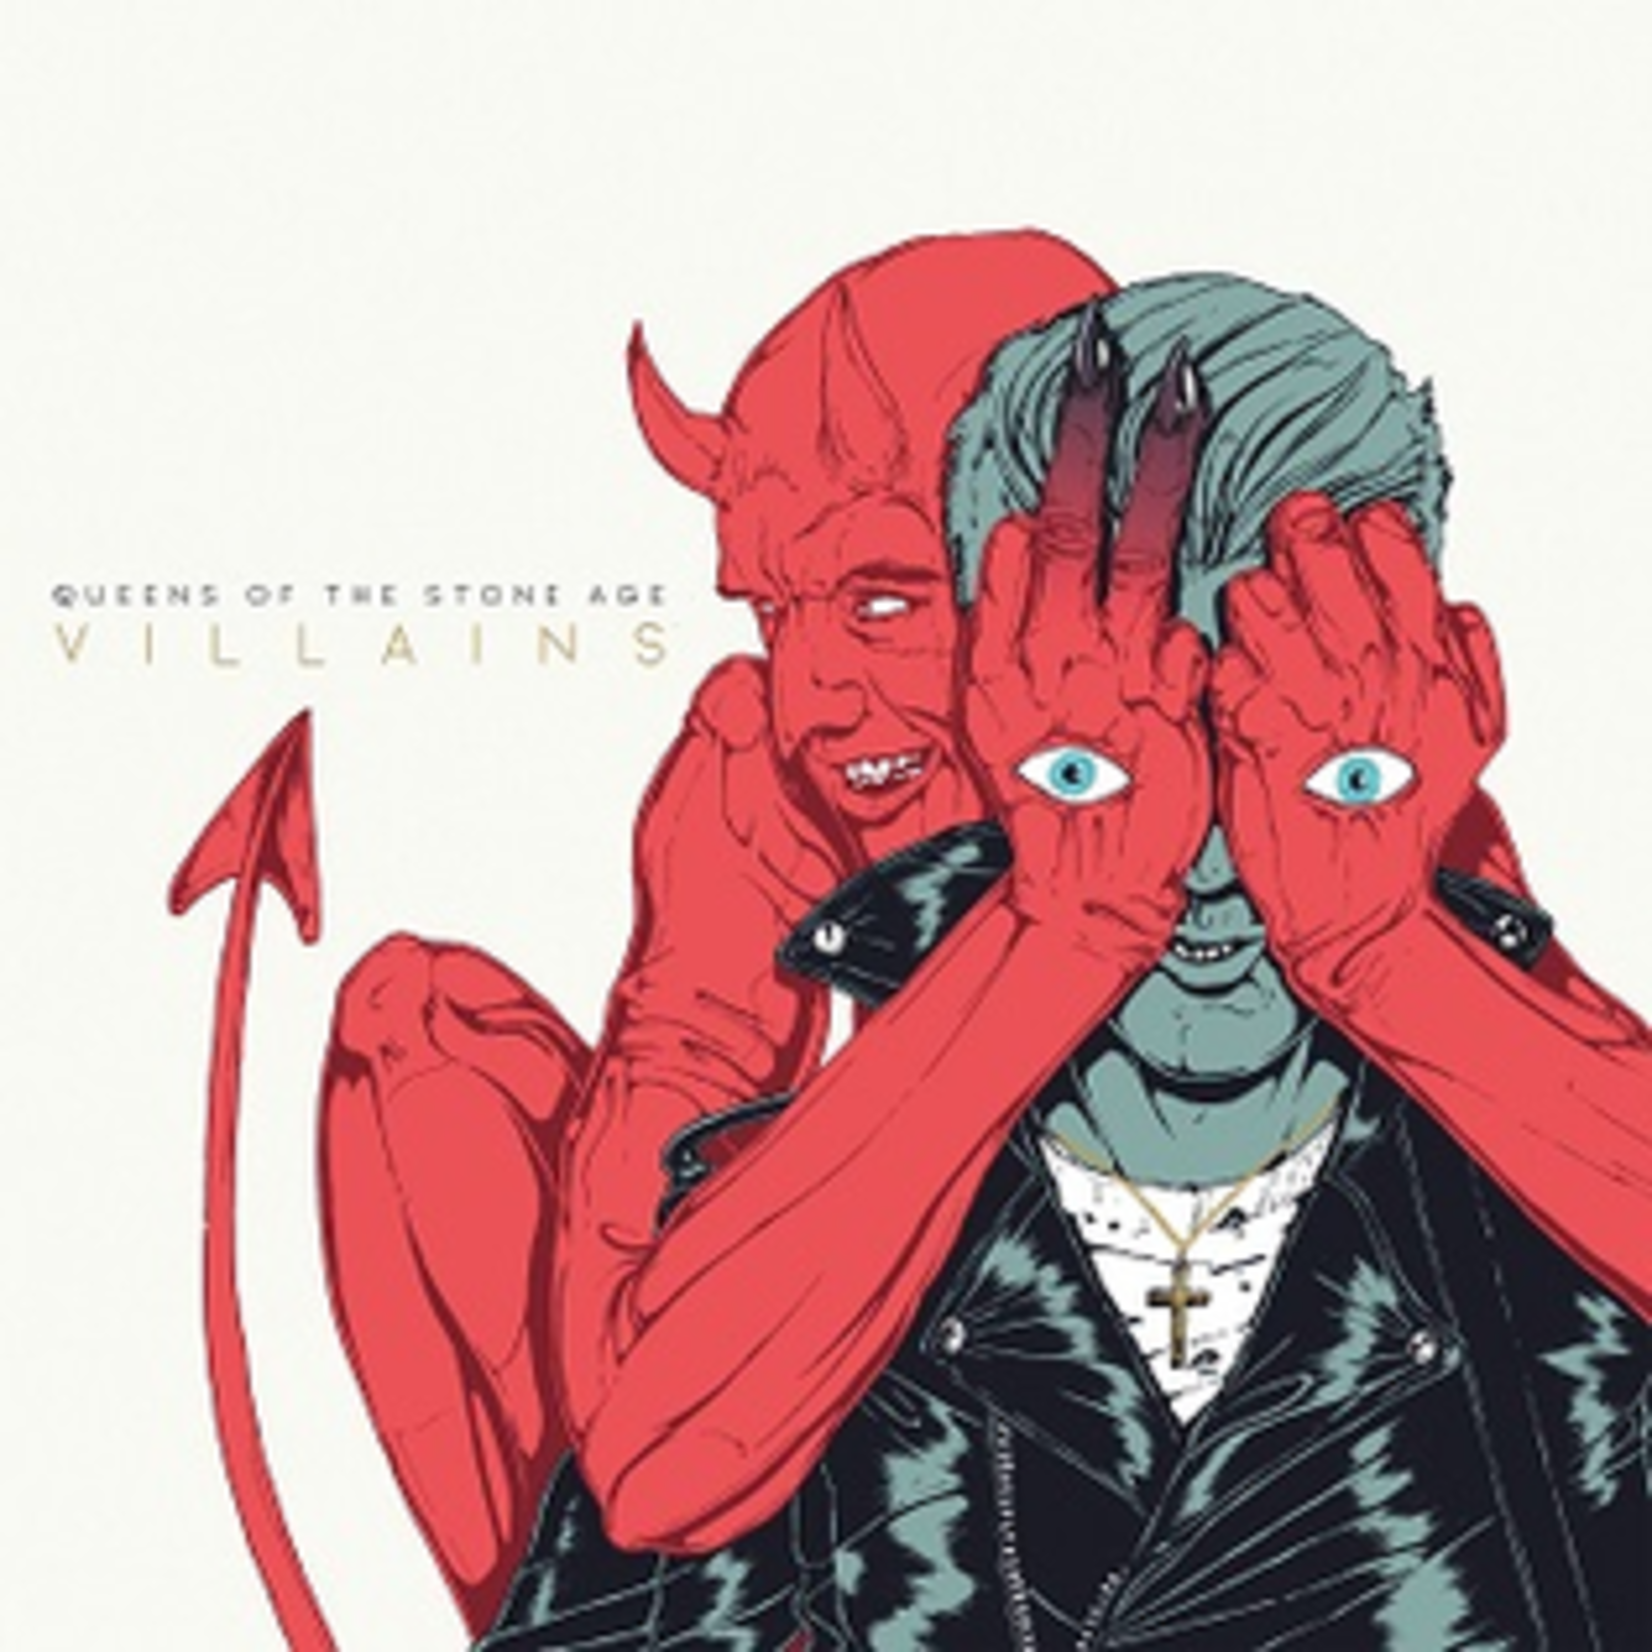 [New] Queens of the Stone Age - Villains (2LP, white vinyl, poster, reissue)